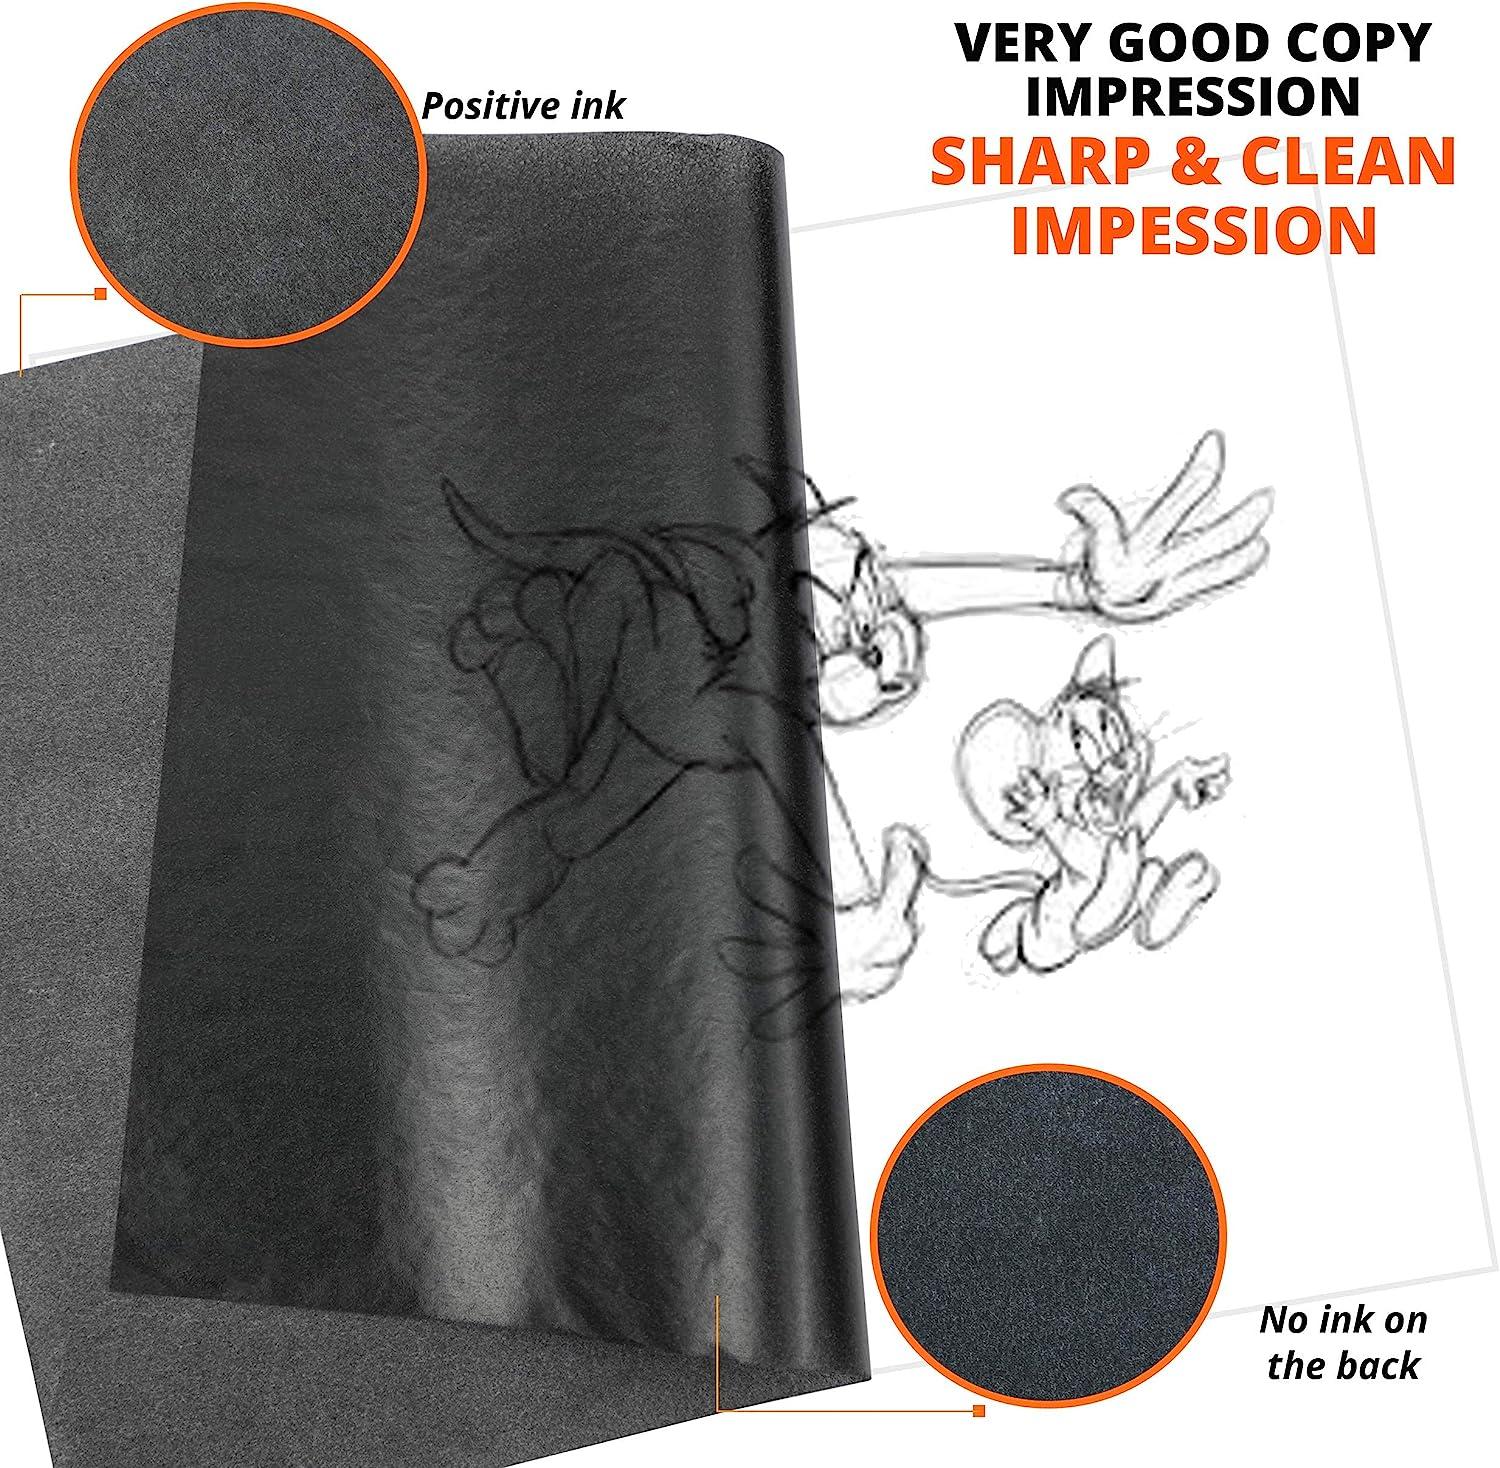 Paperzoid 30-Pack Carbon Paper for Tracing Patterns and Sketches, (8.5x11  Inches) A4 Size Black